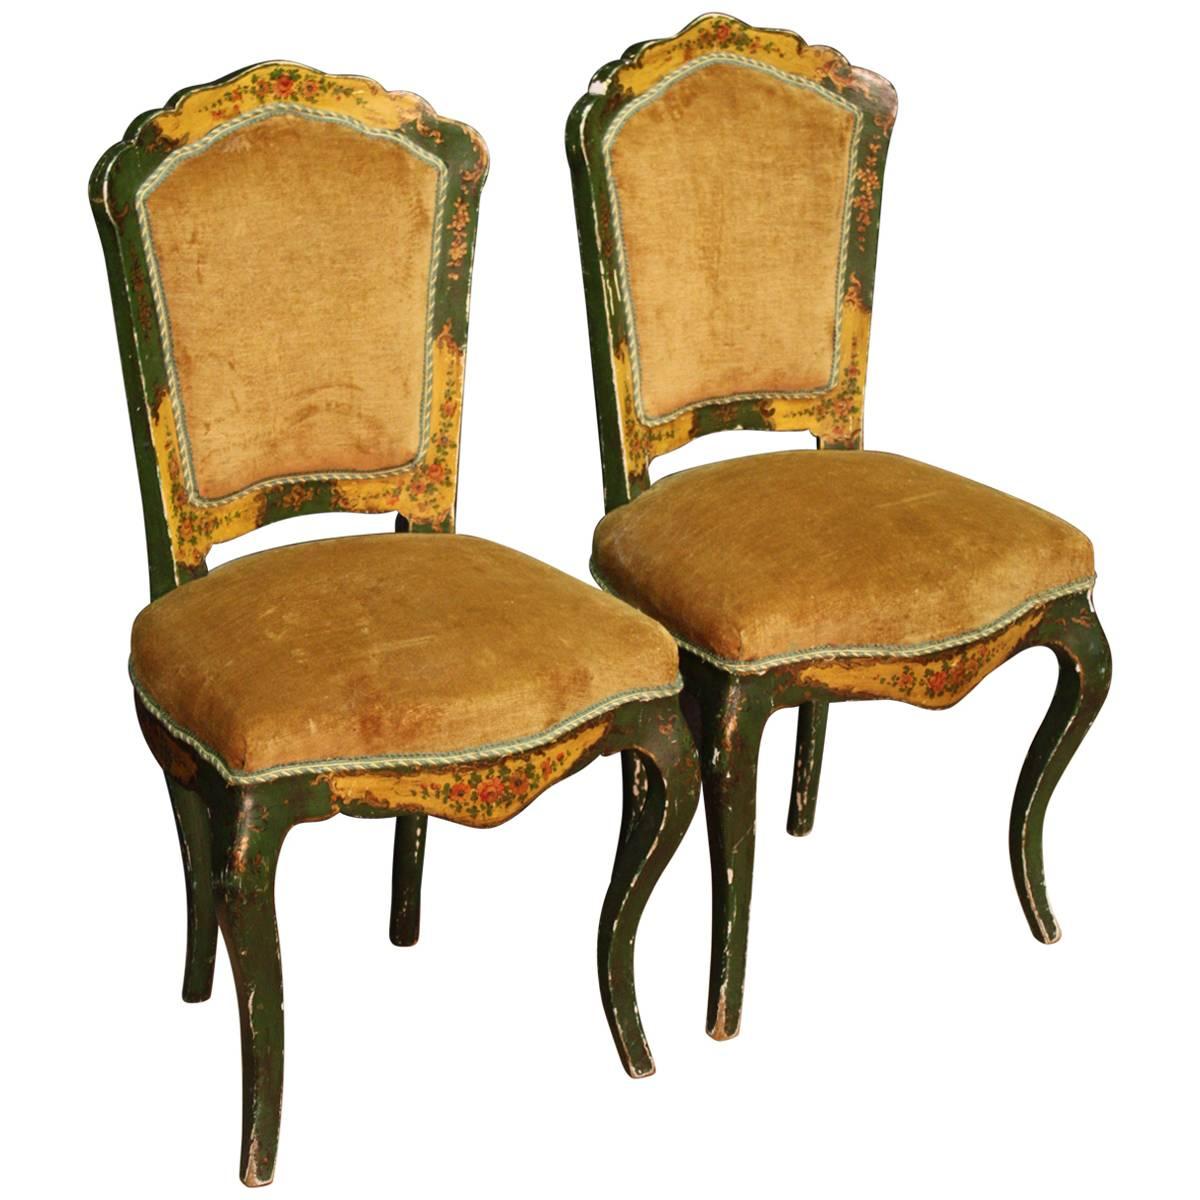 20th Century Pair of Venetian Lacquered and Gilded Chairs